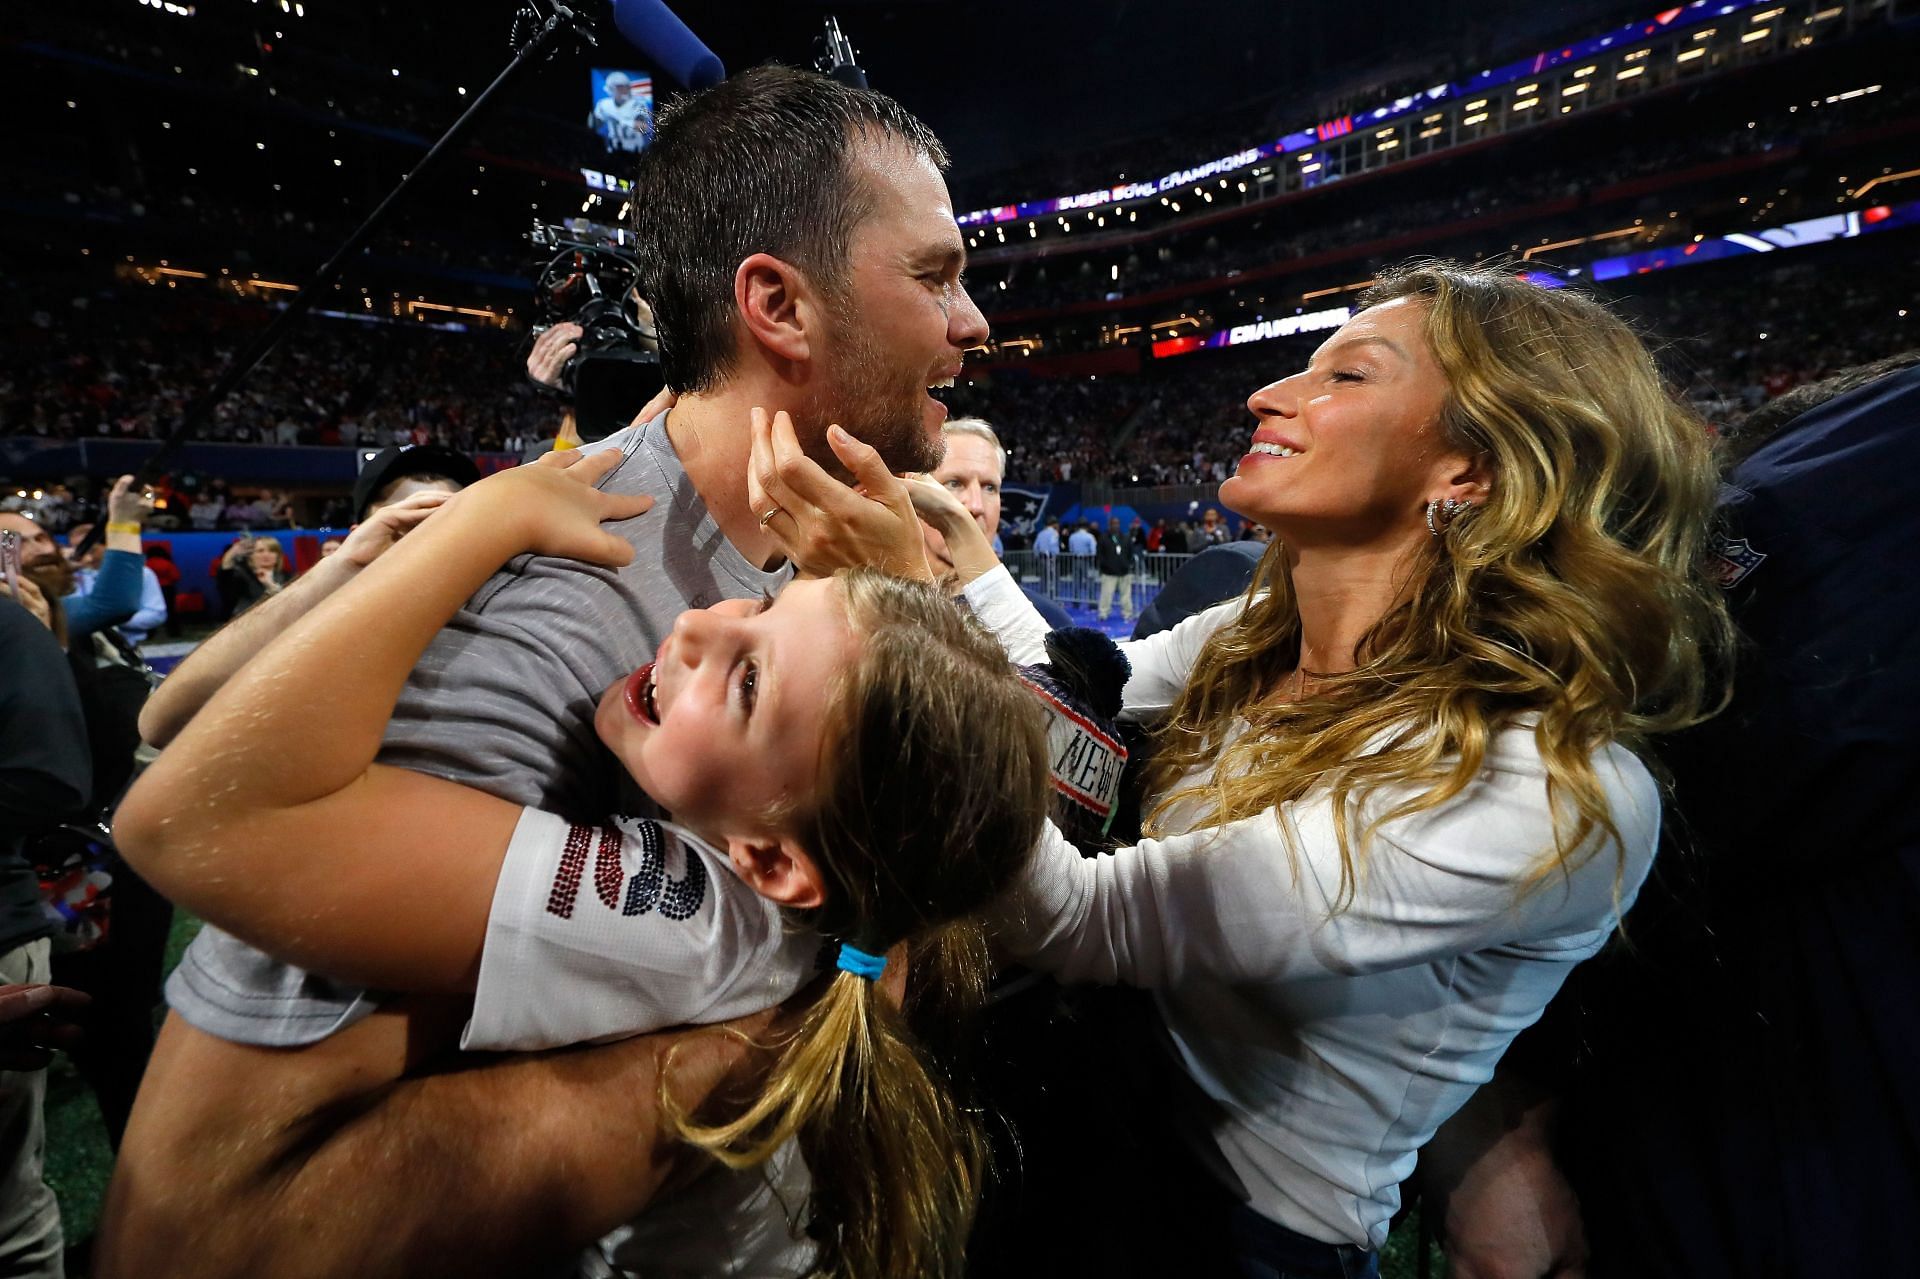 Gisele Bundchen and Tom Brady at the Super Bowl LIII - New England Patriots v Los Angeles Rams game